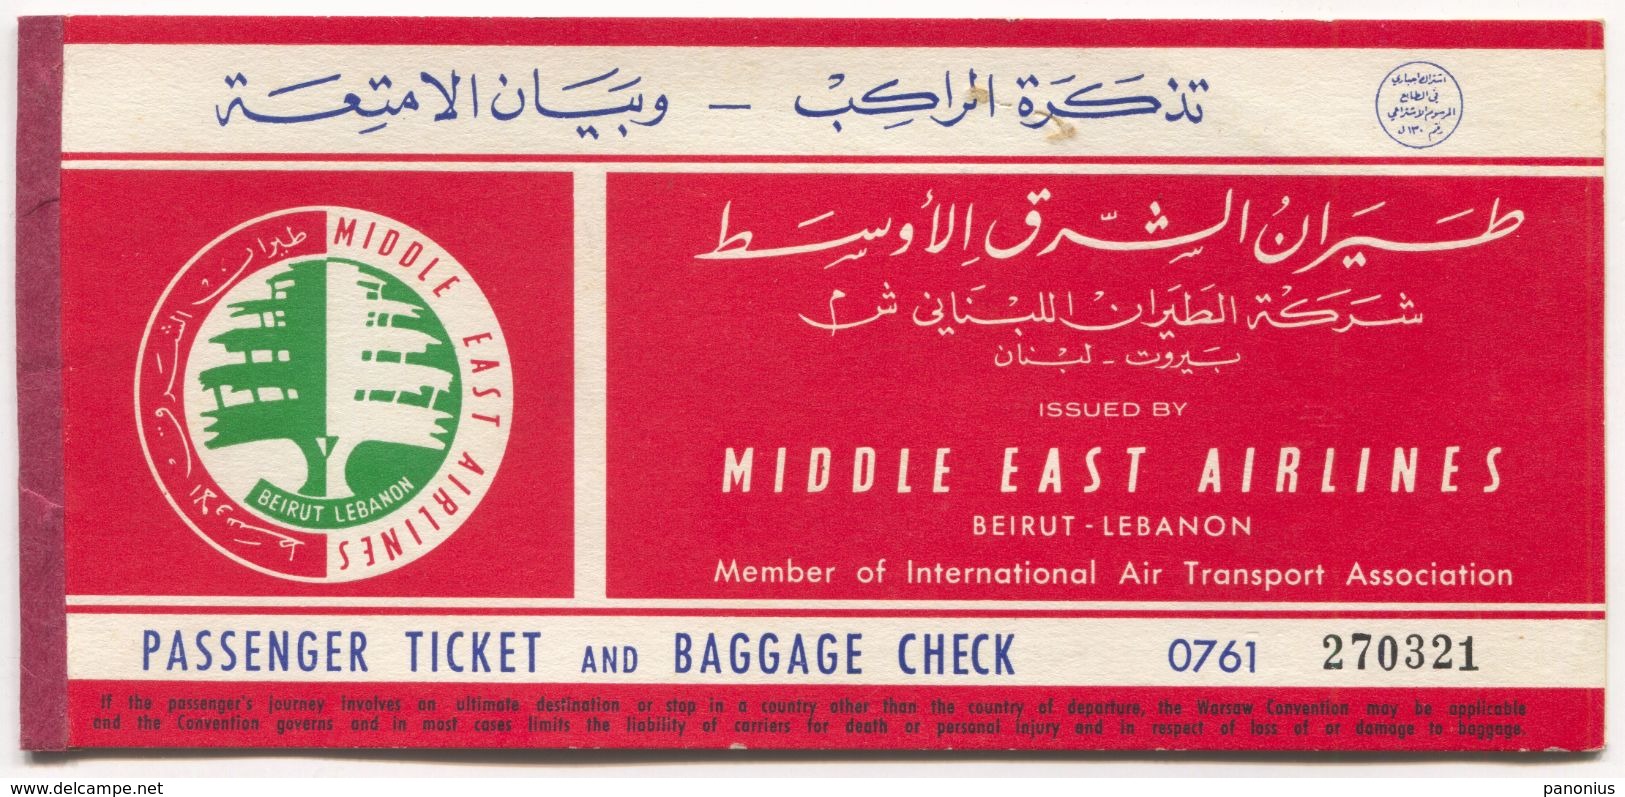 MEA /  MIDDLE EAST AIRLINES - BEIRUT LEBANON LIBAN, PASSENGER TICKET & BAGGAGE CHECK, BILLET COUPON, Year 1961 - Tickets